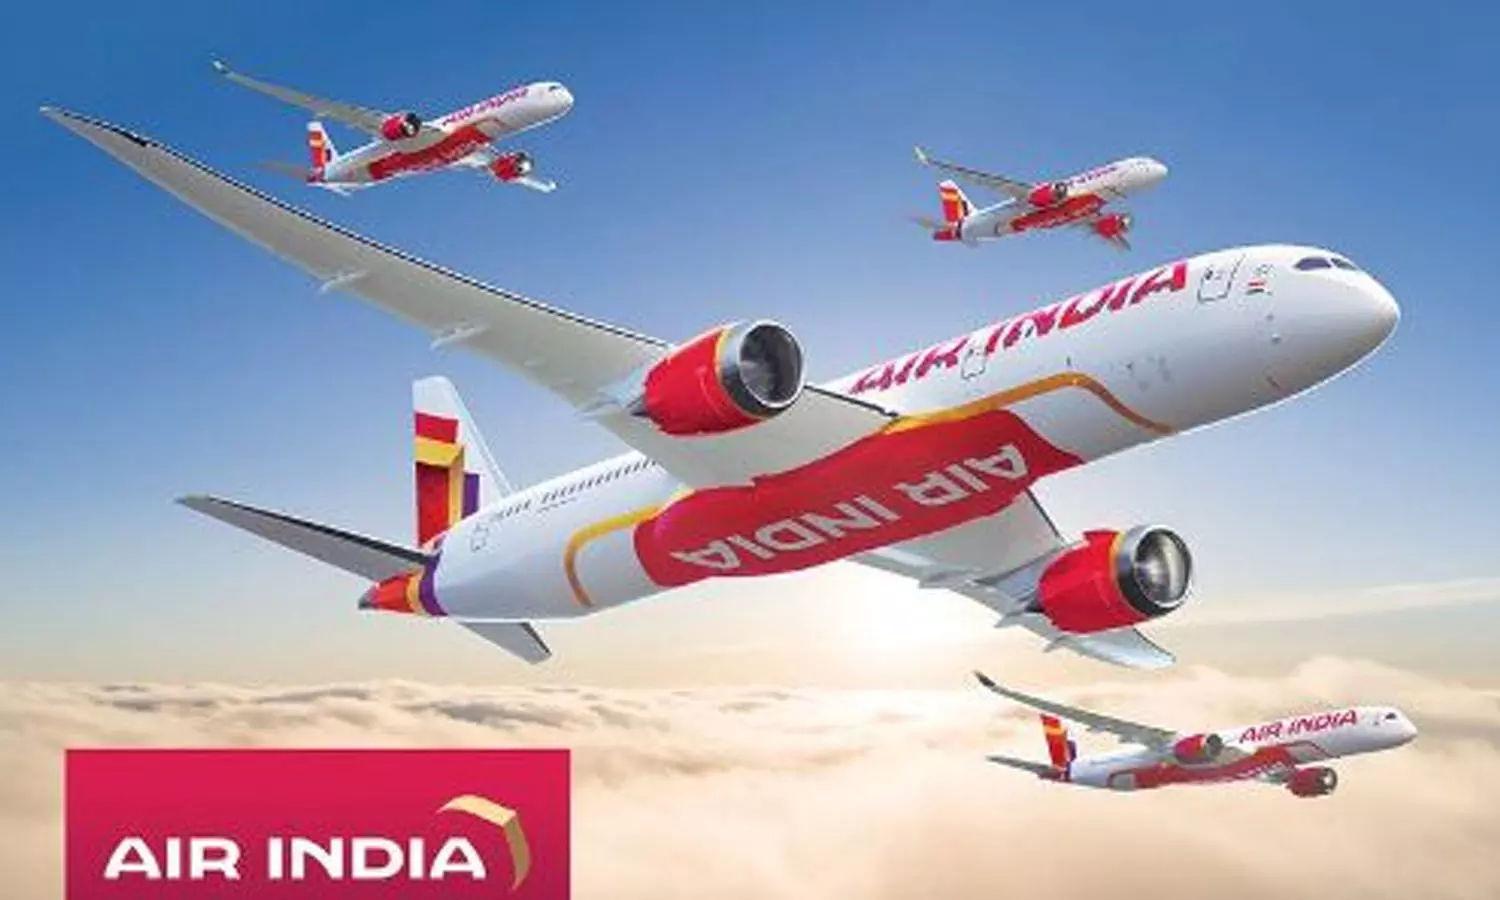 Air India domestic travel sale opens for 96 hours; minimum fare at Rs. 1,470